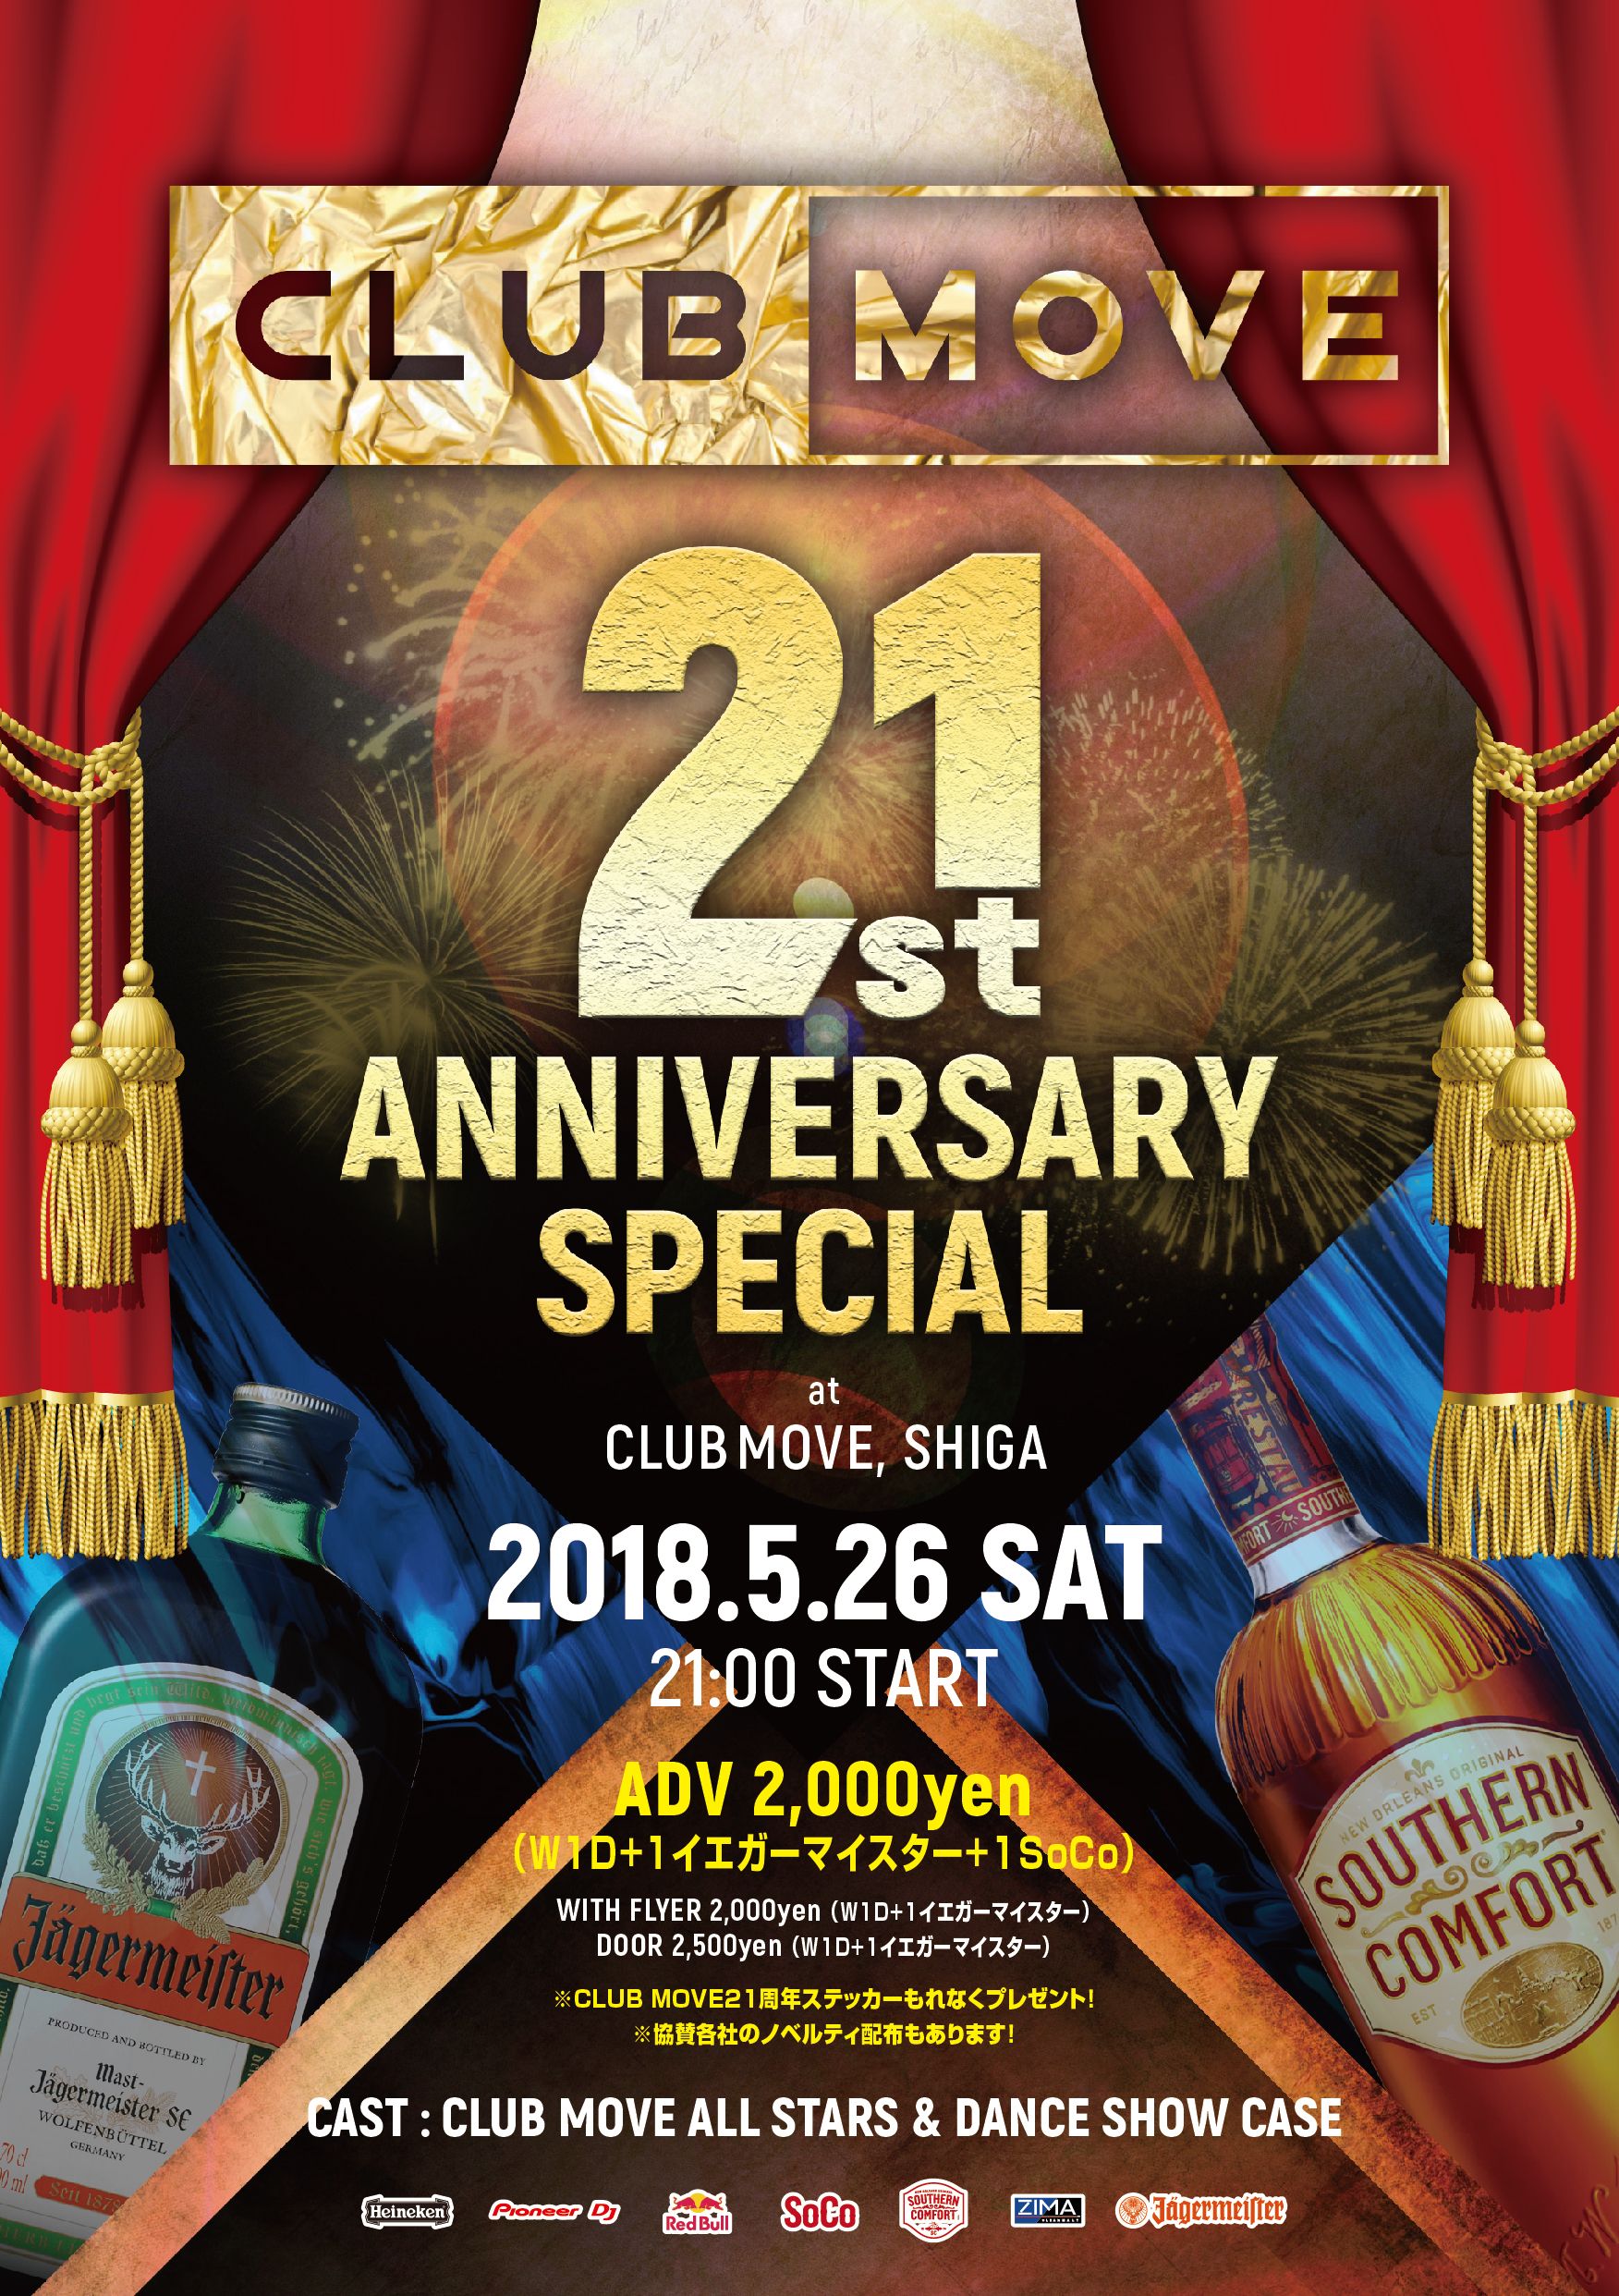 ～CLUB MOVE 21 st ANNIVERSARY SPECIAL～